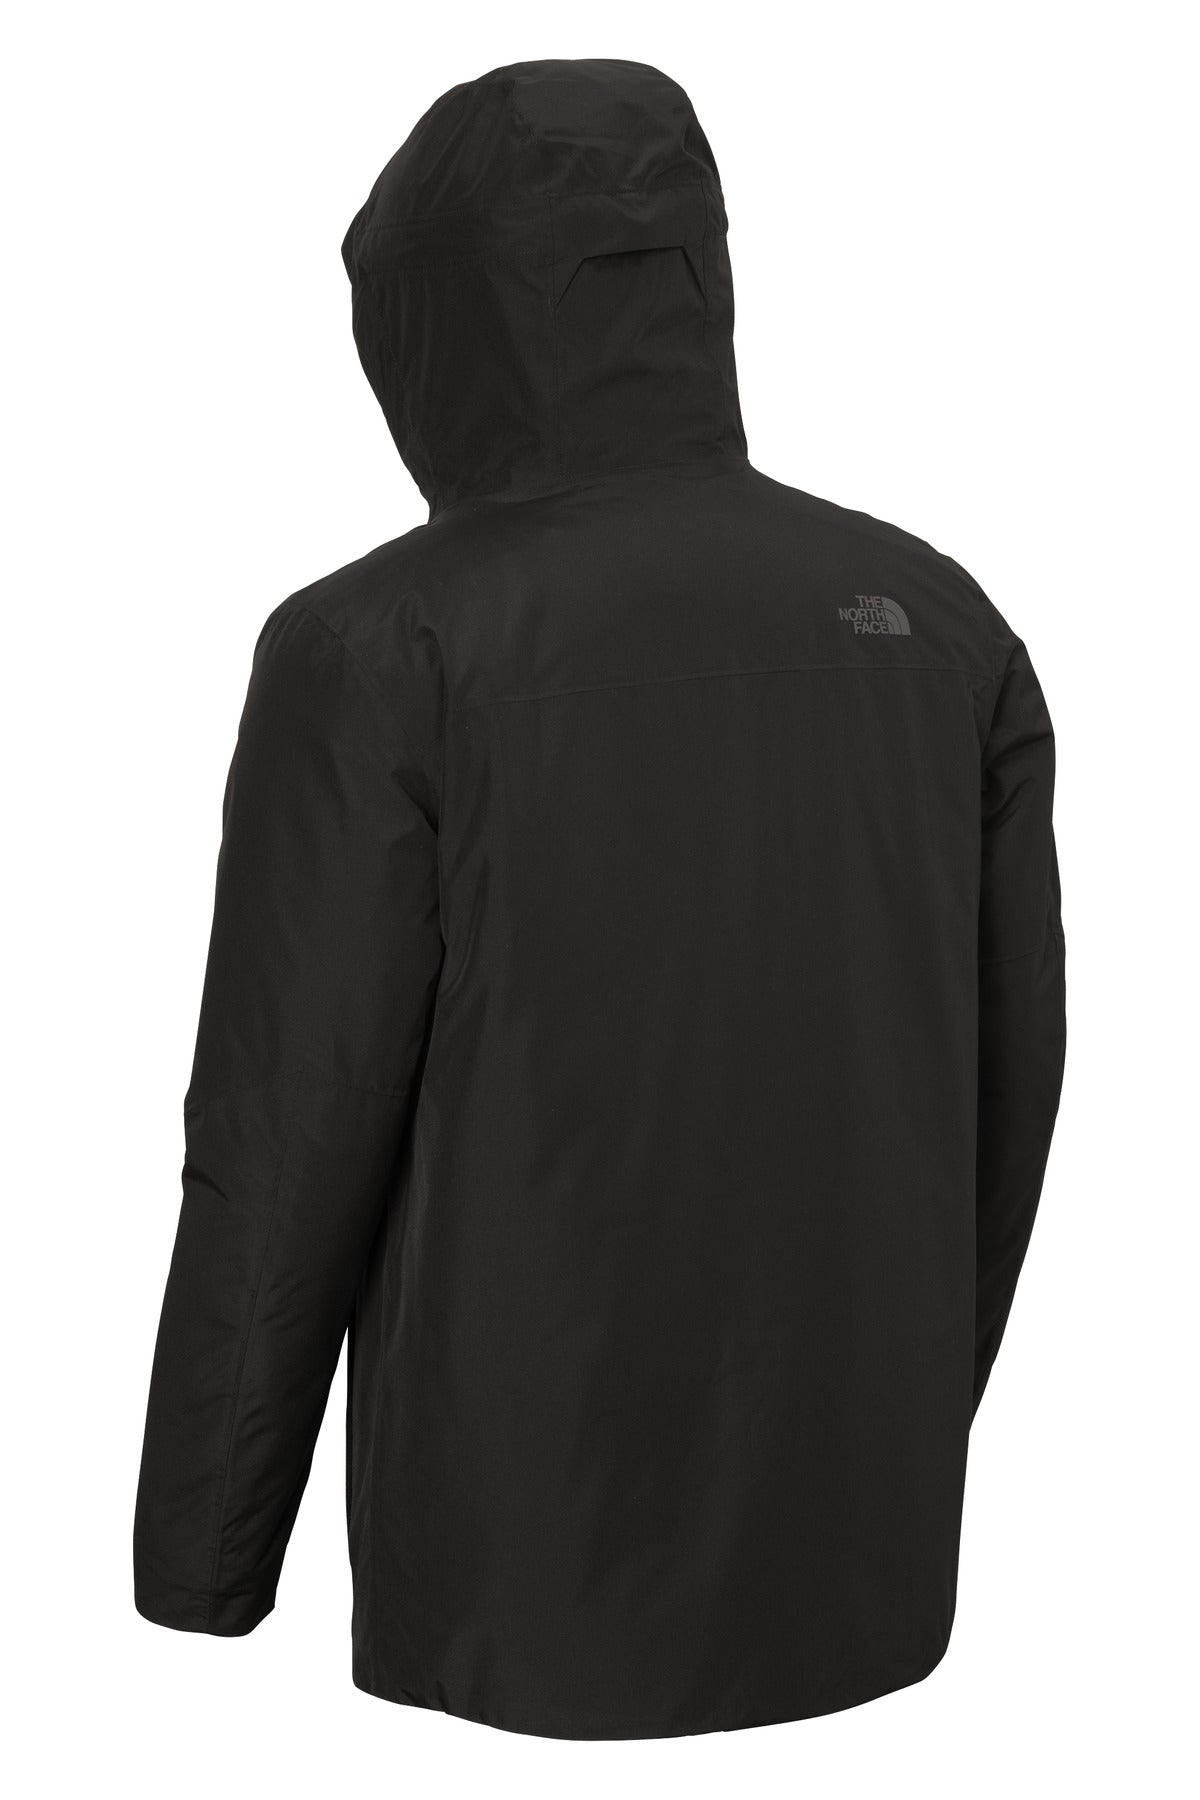 The North Face Ascendent Insulated Jacket . NF0A3SES